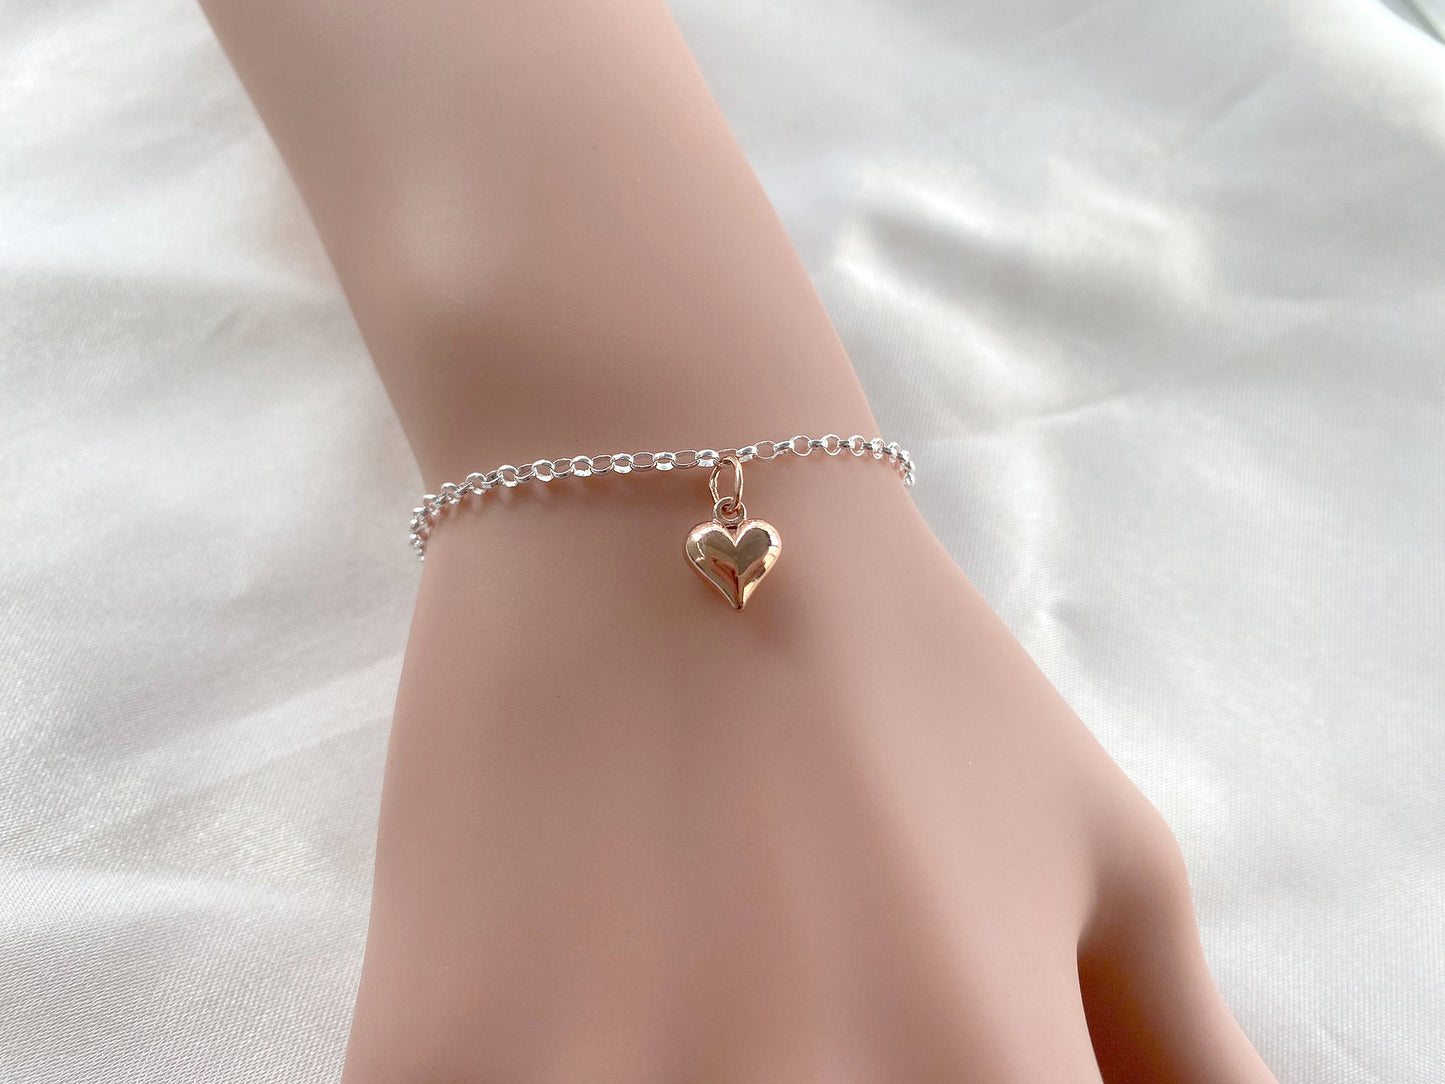 Best Friend Rose Gold Puffy Heart Bracelet in Sterling Silver 925, Personalised Gift